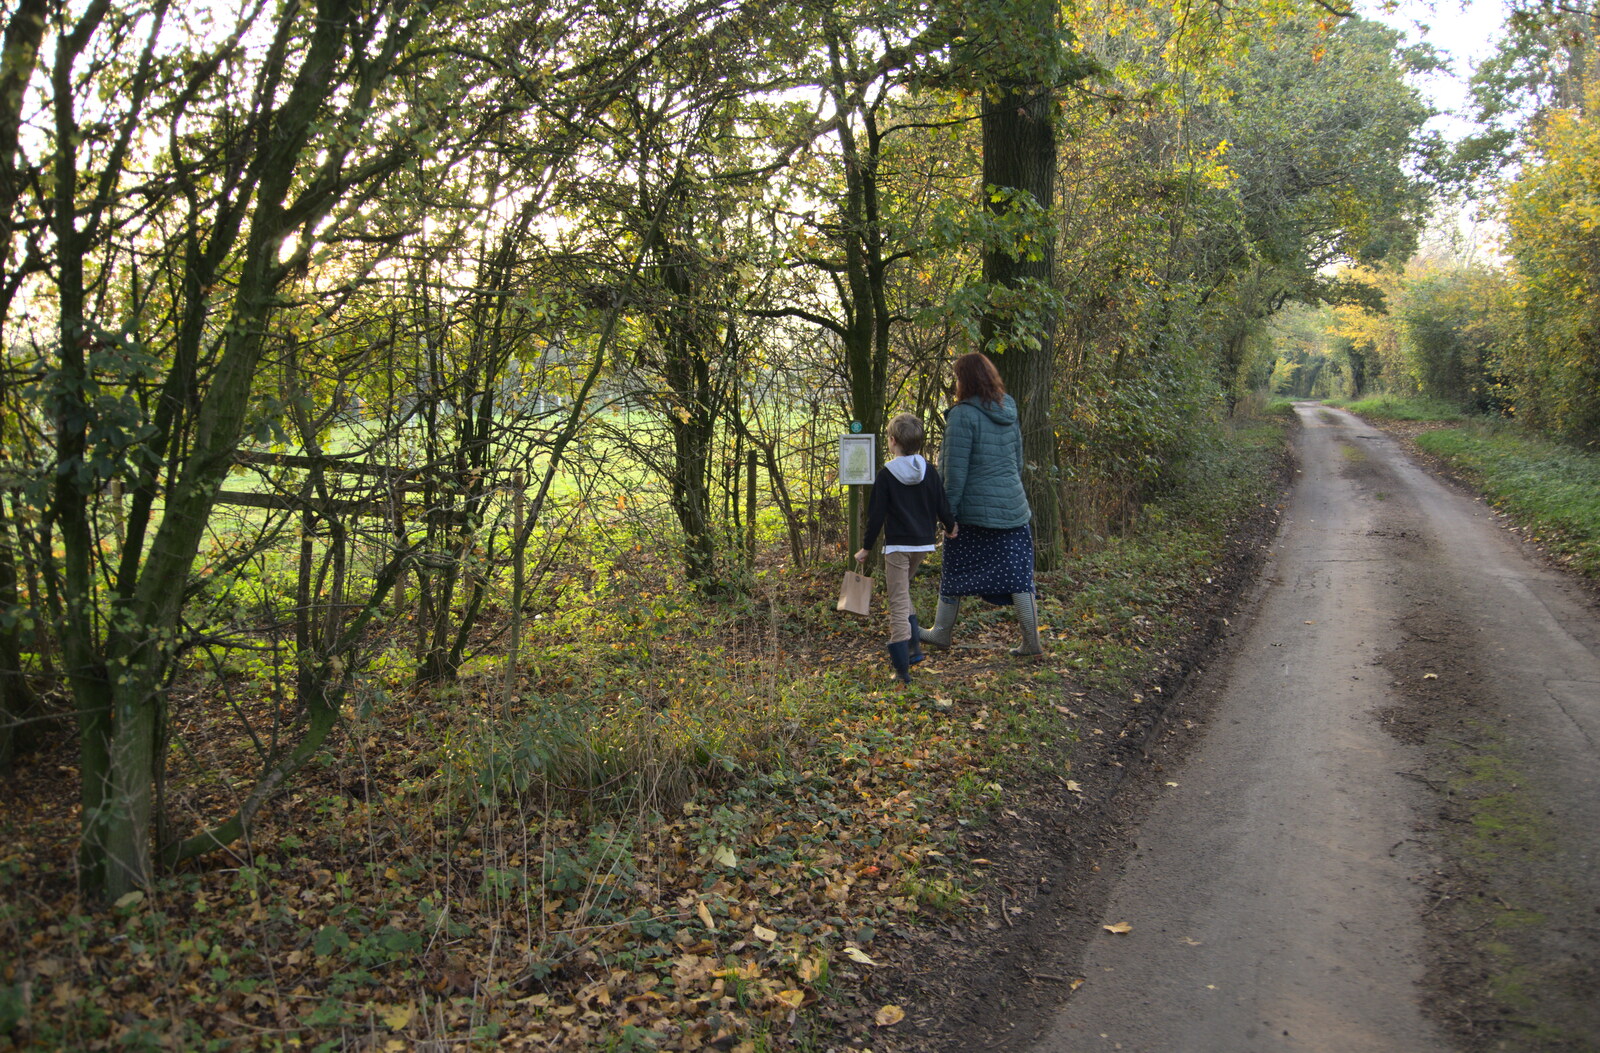 Harry and Isobel veer off onto the path from To See the Hairy Pigs, Thrandeston, Suffolk - 7th November 2020